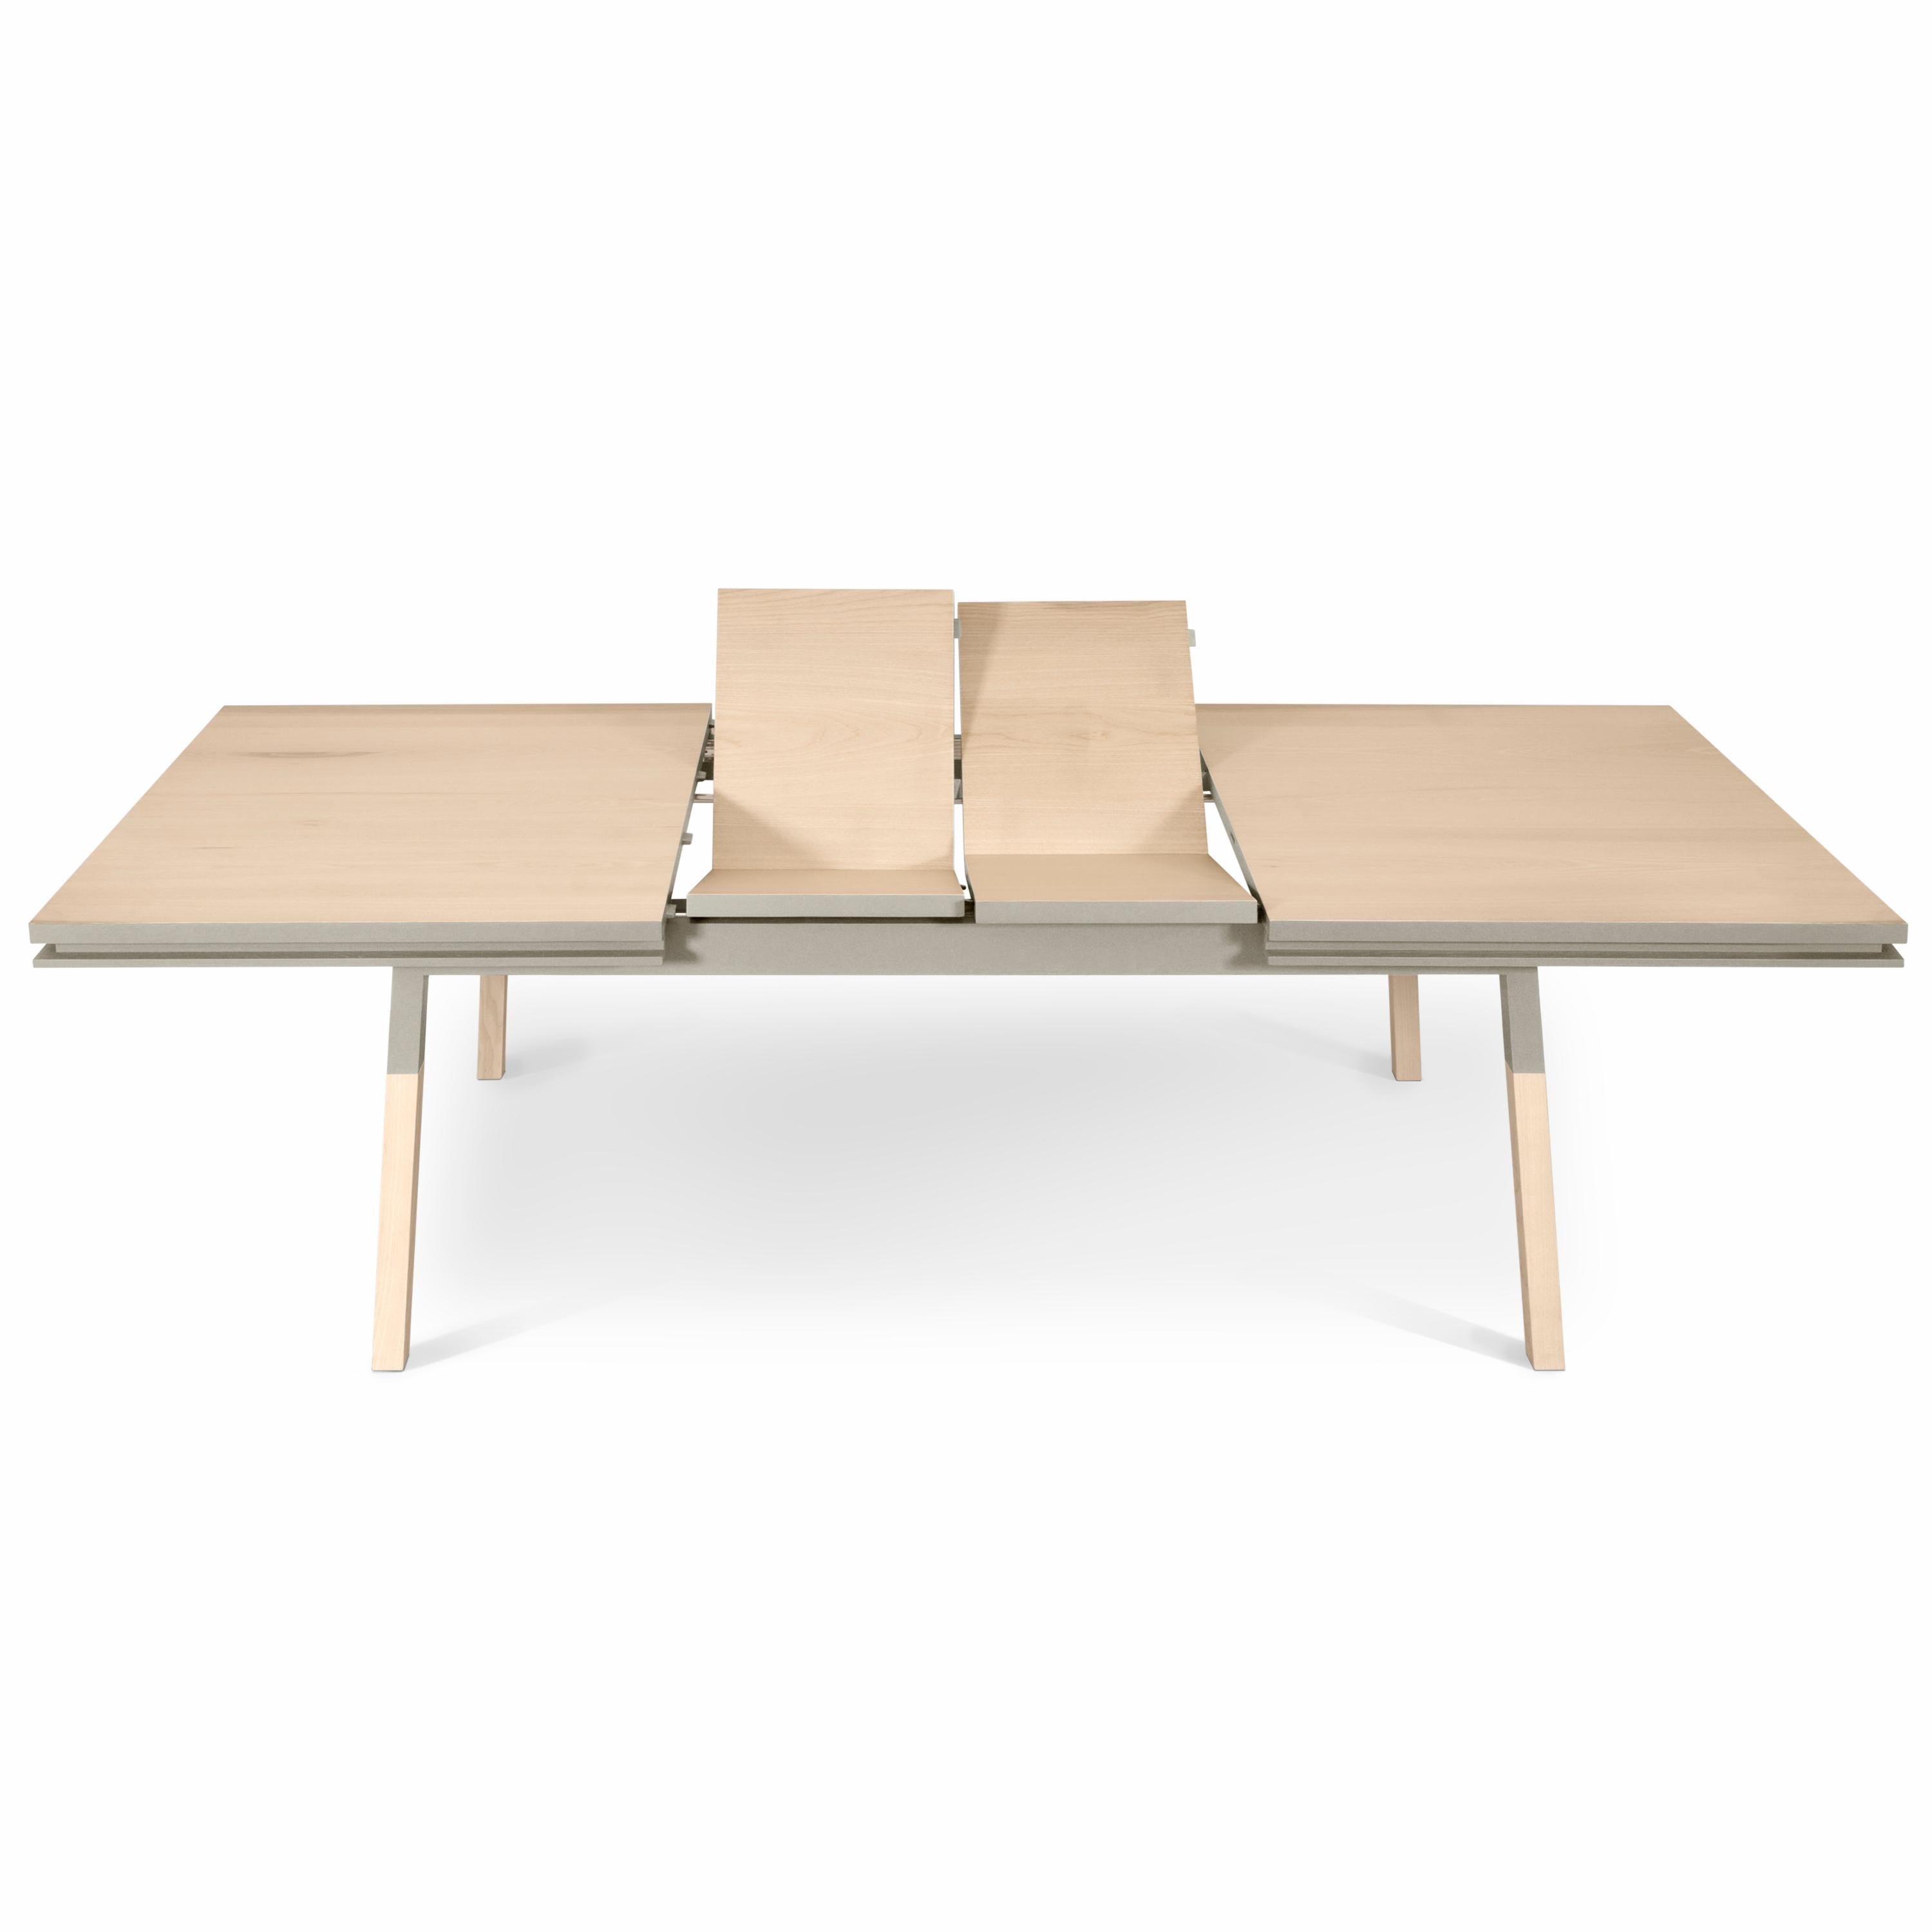 This rectangular dining table is proposed with 2 integrated and folded extensions. 

It is made of 100% solid ash wood from sustainably managed and PEFC certified French forests.

The 3 lengths are 160 cm / 63 inches when the table is closed, 200 cm